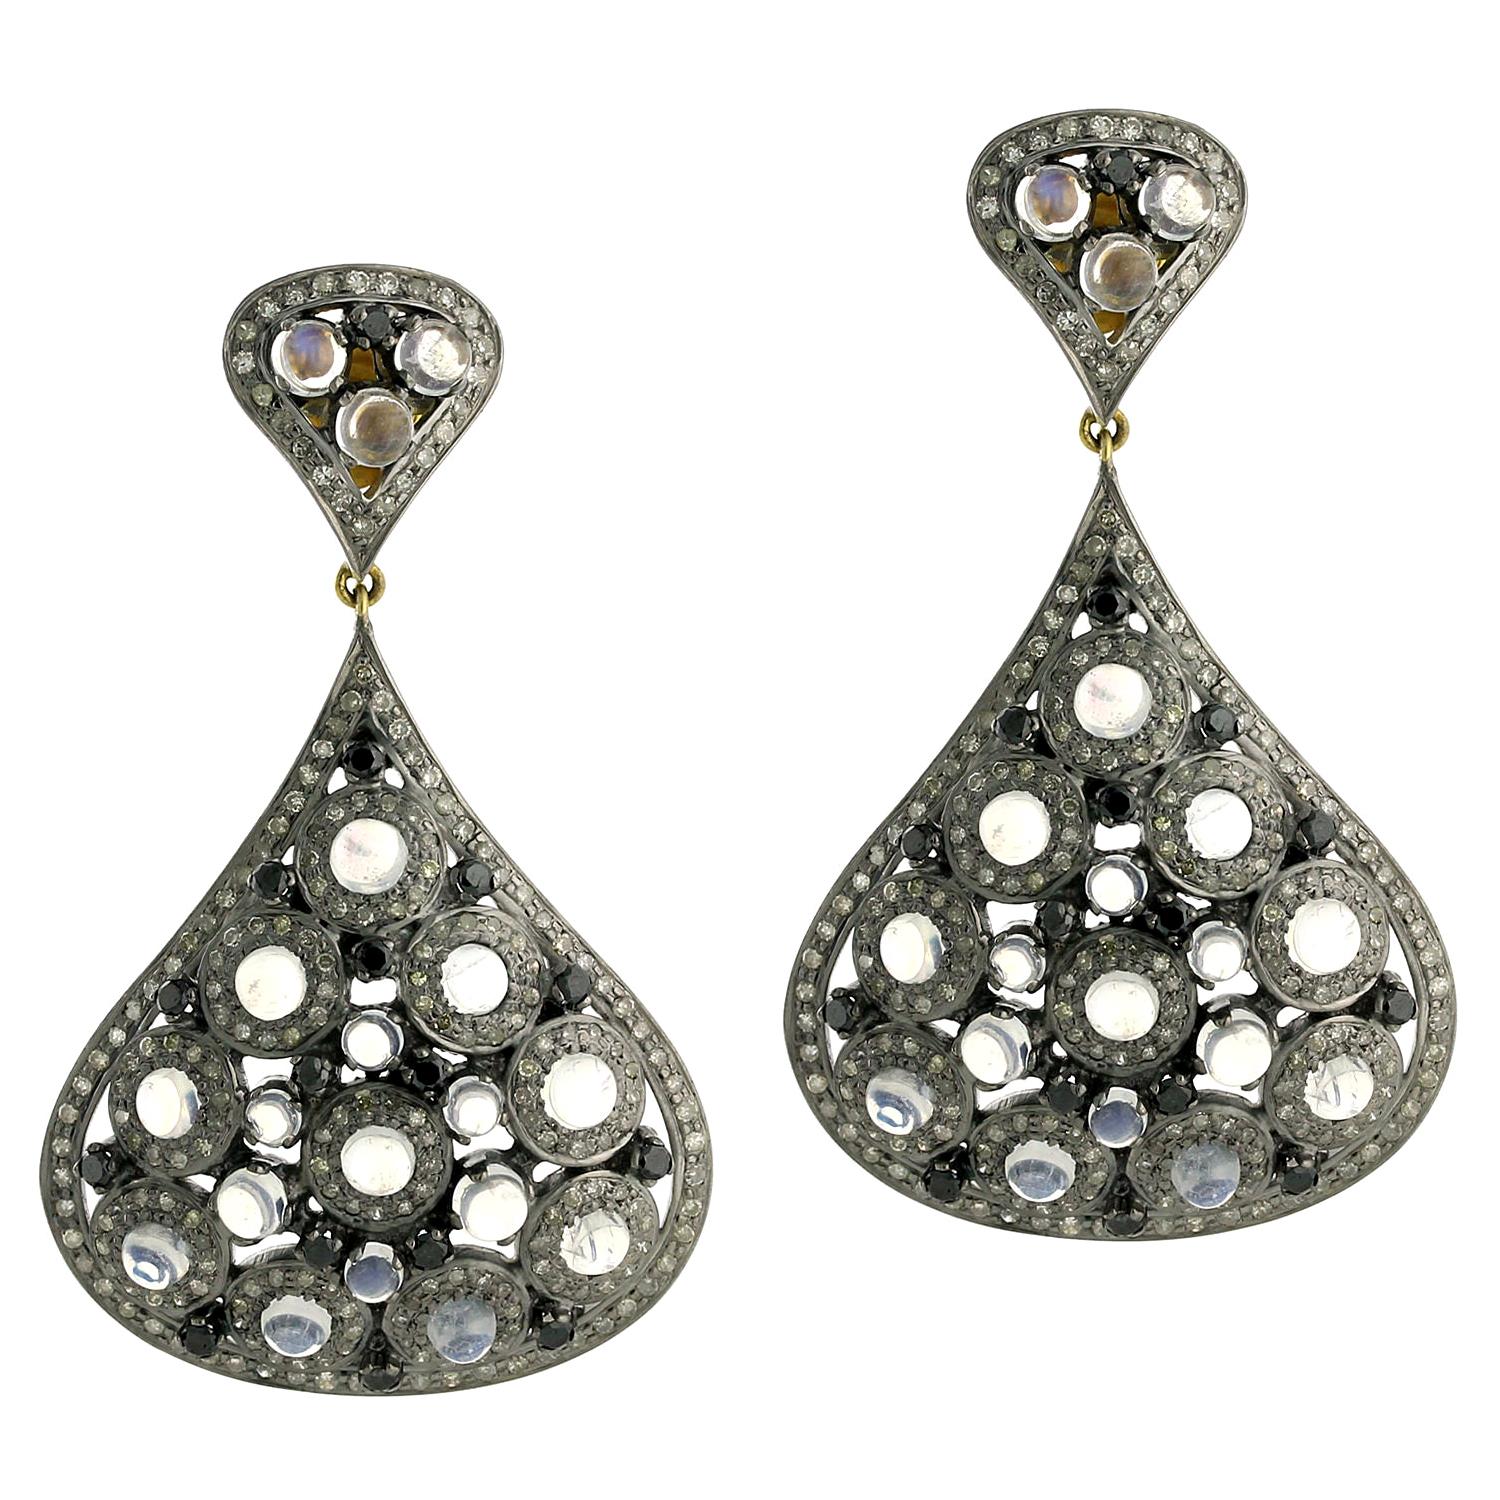 Designer Moonstone and Diamond Earring Set in Gold and Silver